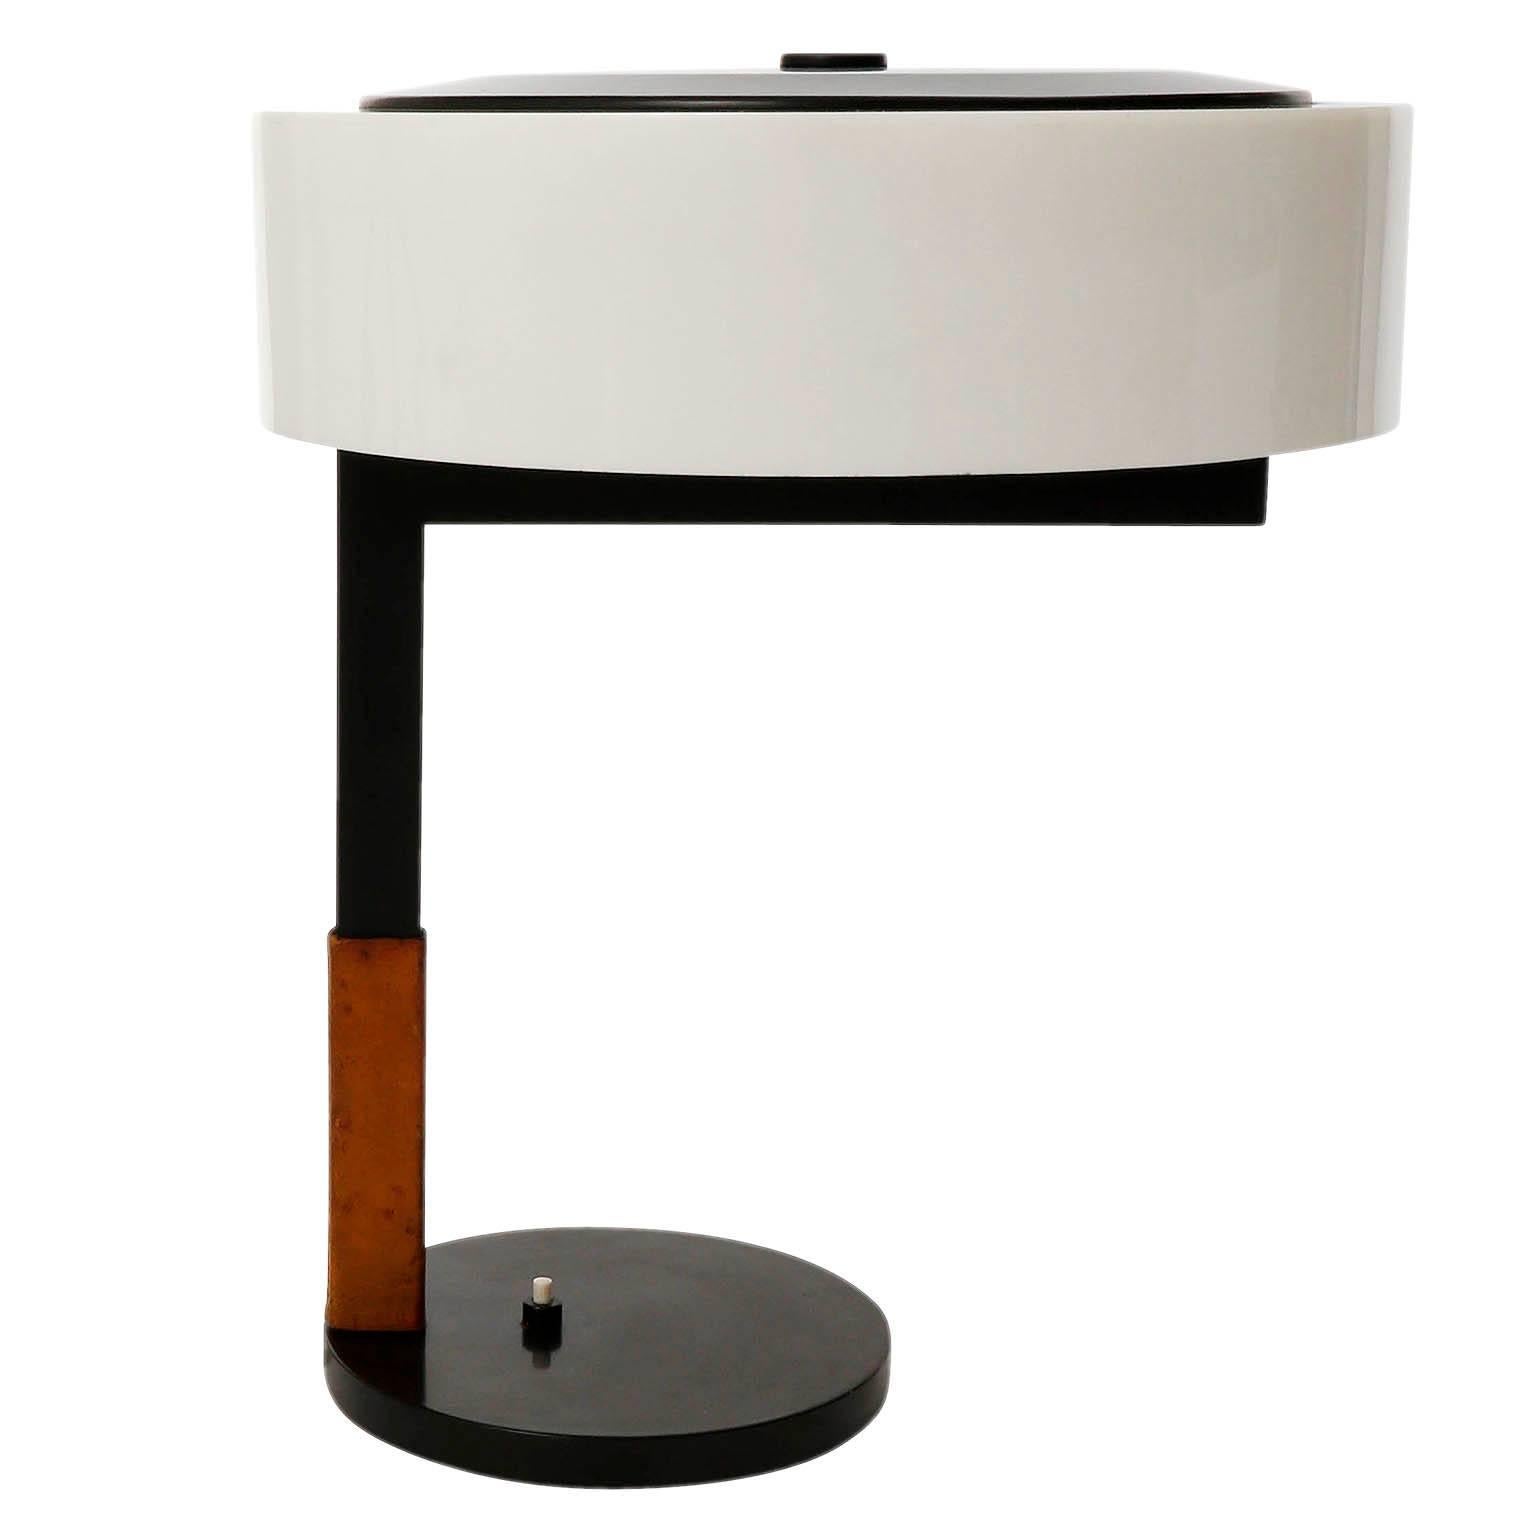 One of two table or desk lights model 'ASSISTENT' (no. 1277) by J.T. Kalmar, Austria, manufactured in midcentury in the late 1960s.
They are made of a blackened iron stand with a brown leather handle. The swiveling lampshade is made of an opal